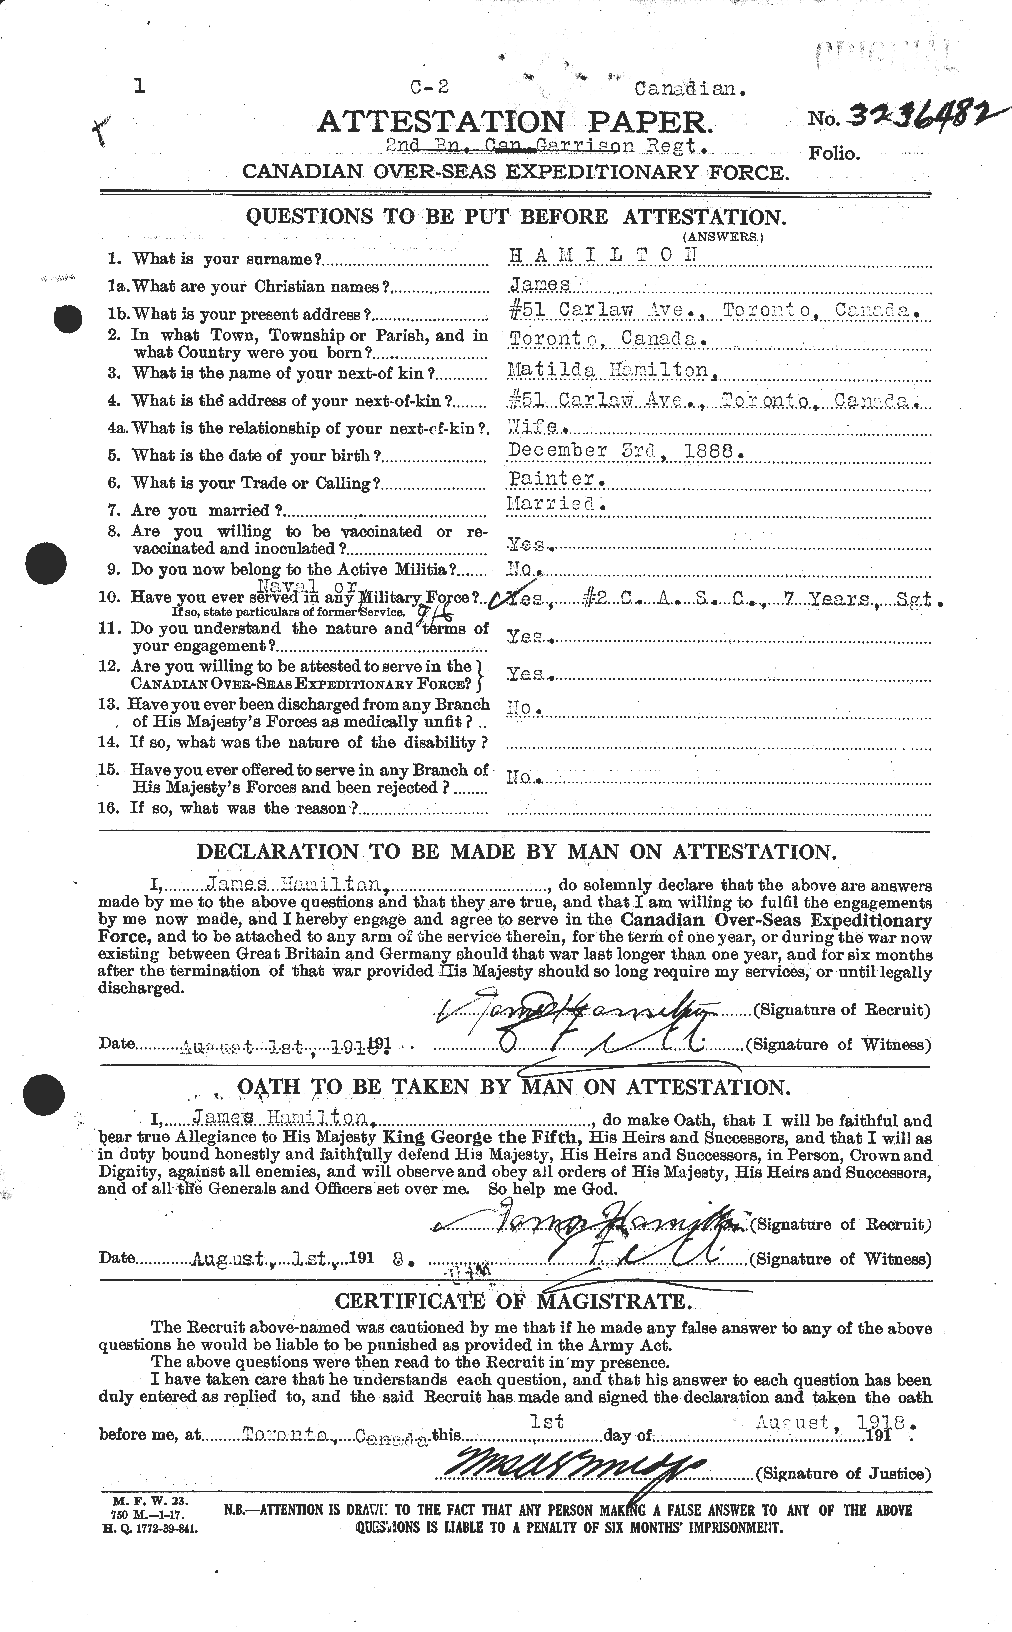 Personnel Records of the First World War - CEF 372933a